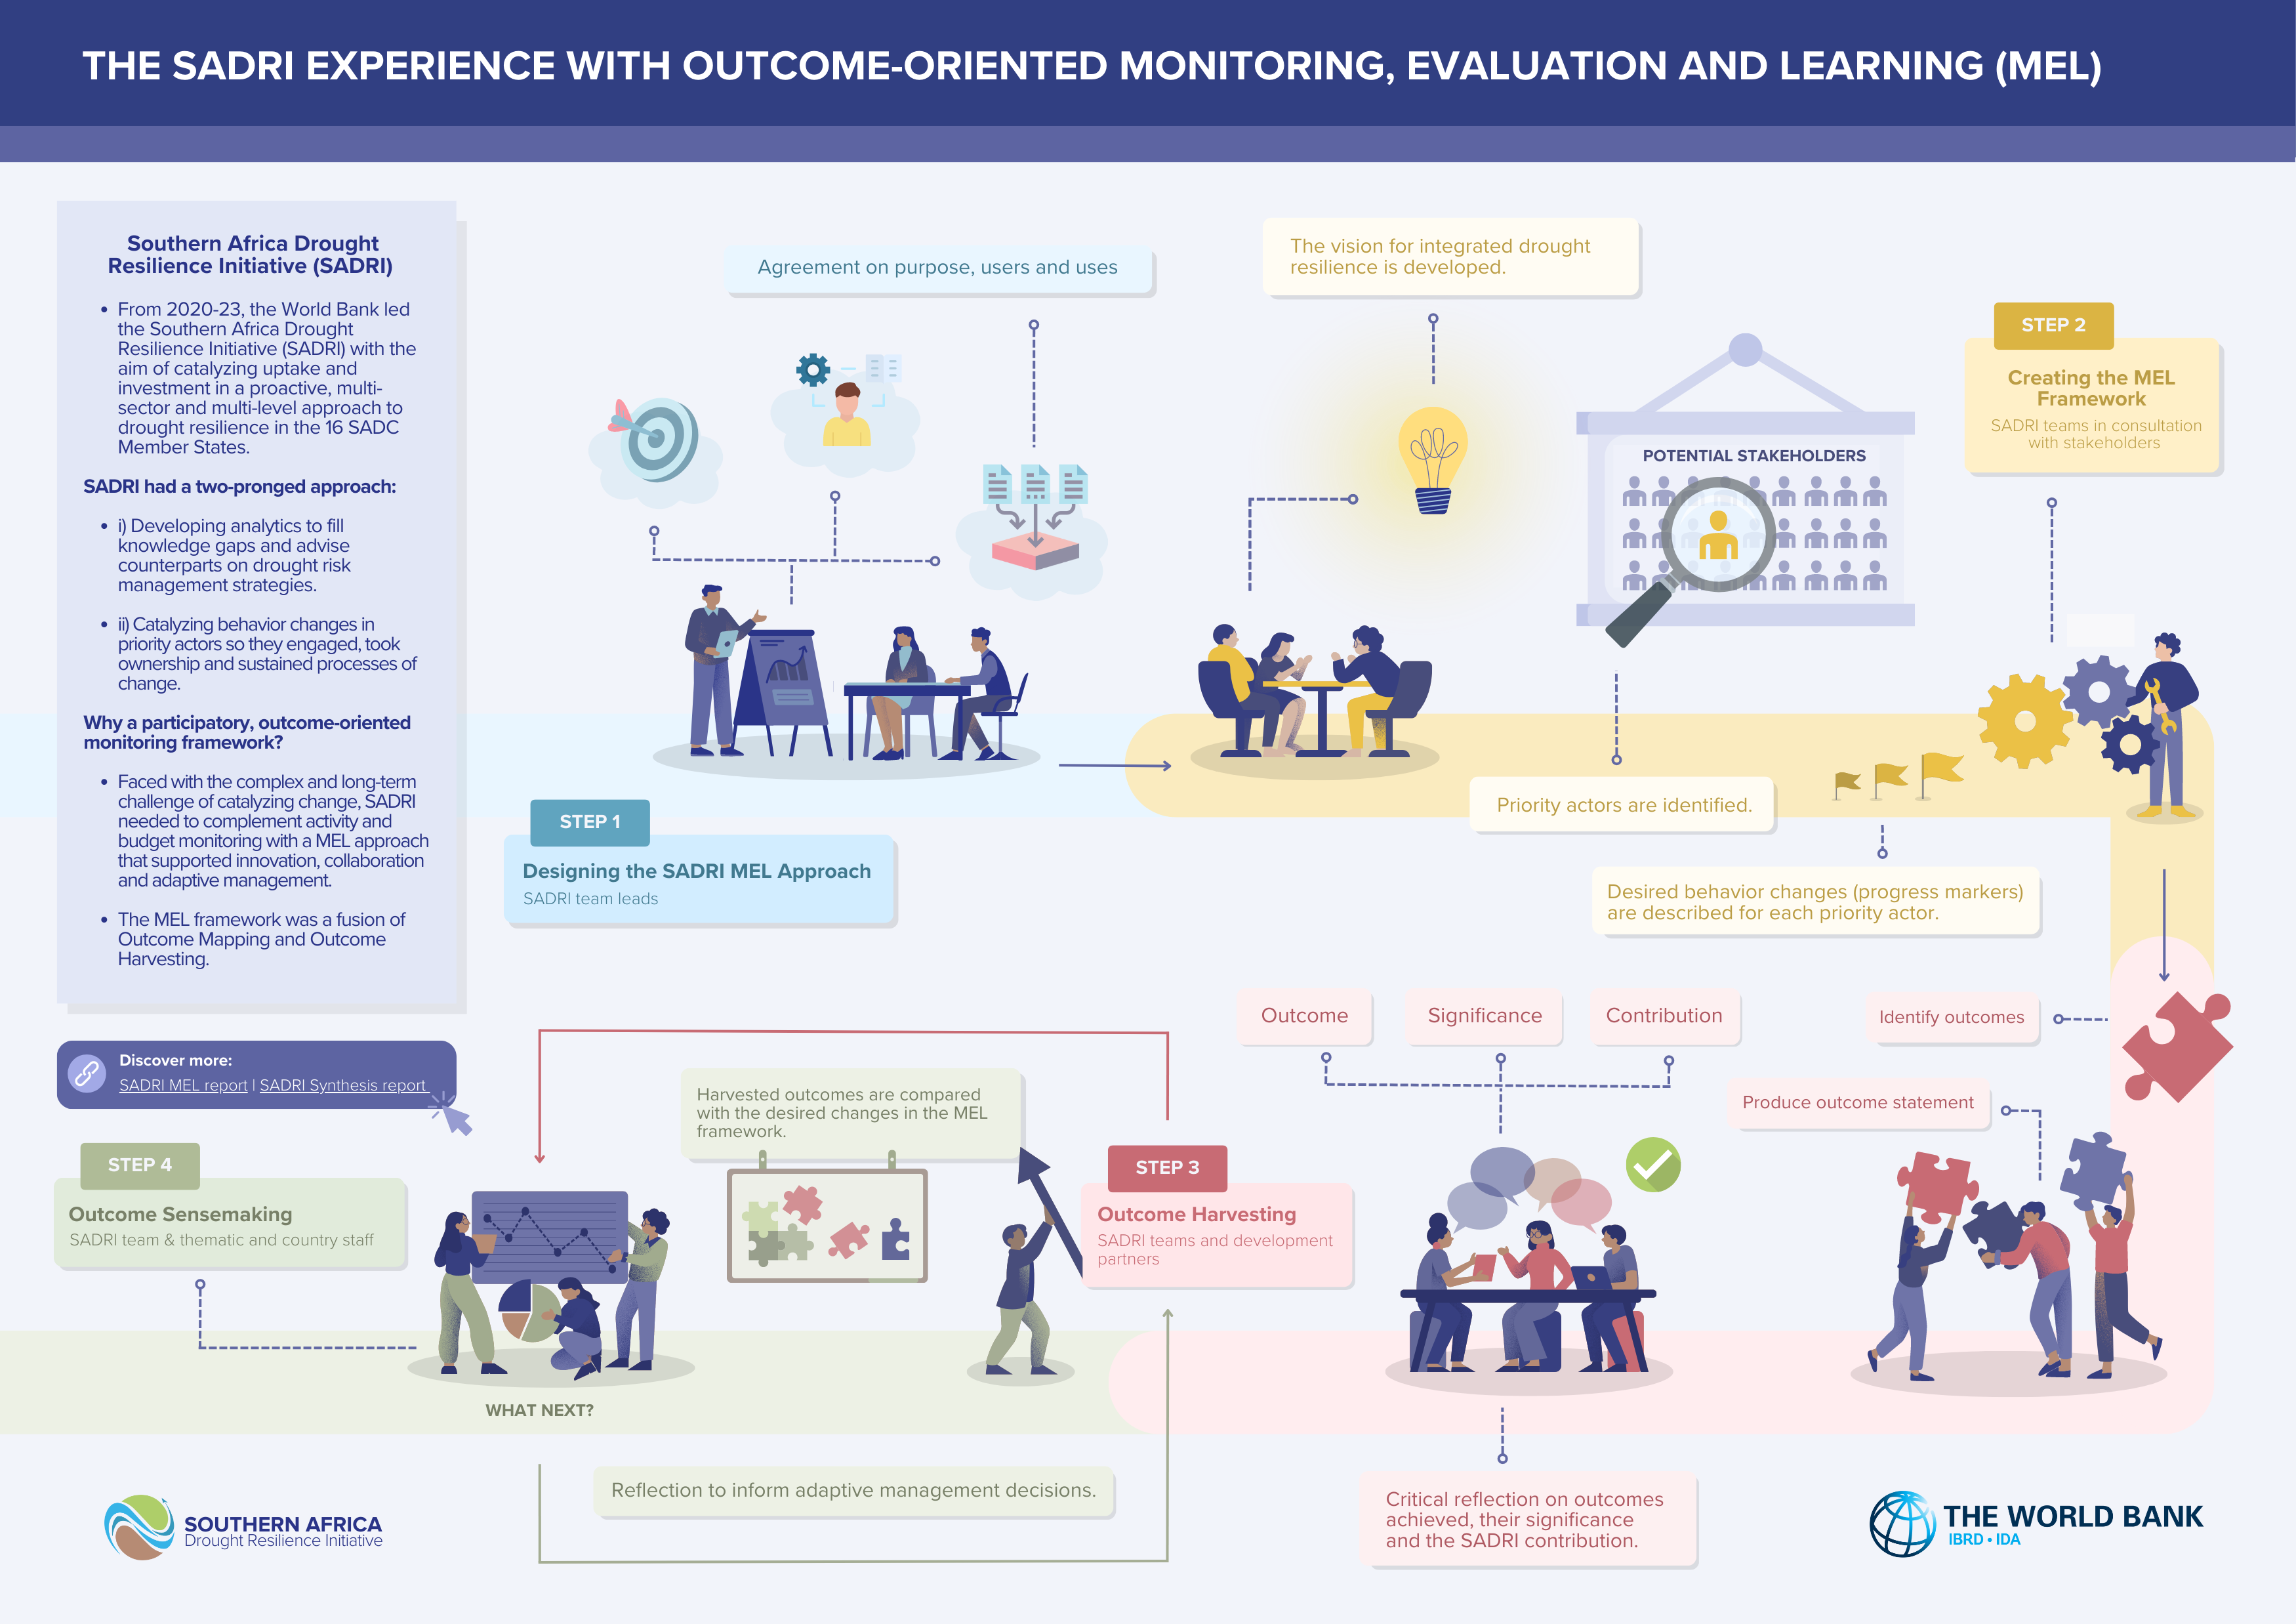 What is Monitoring, Evaluation, and Learning (MEL)?